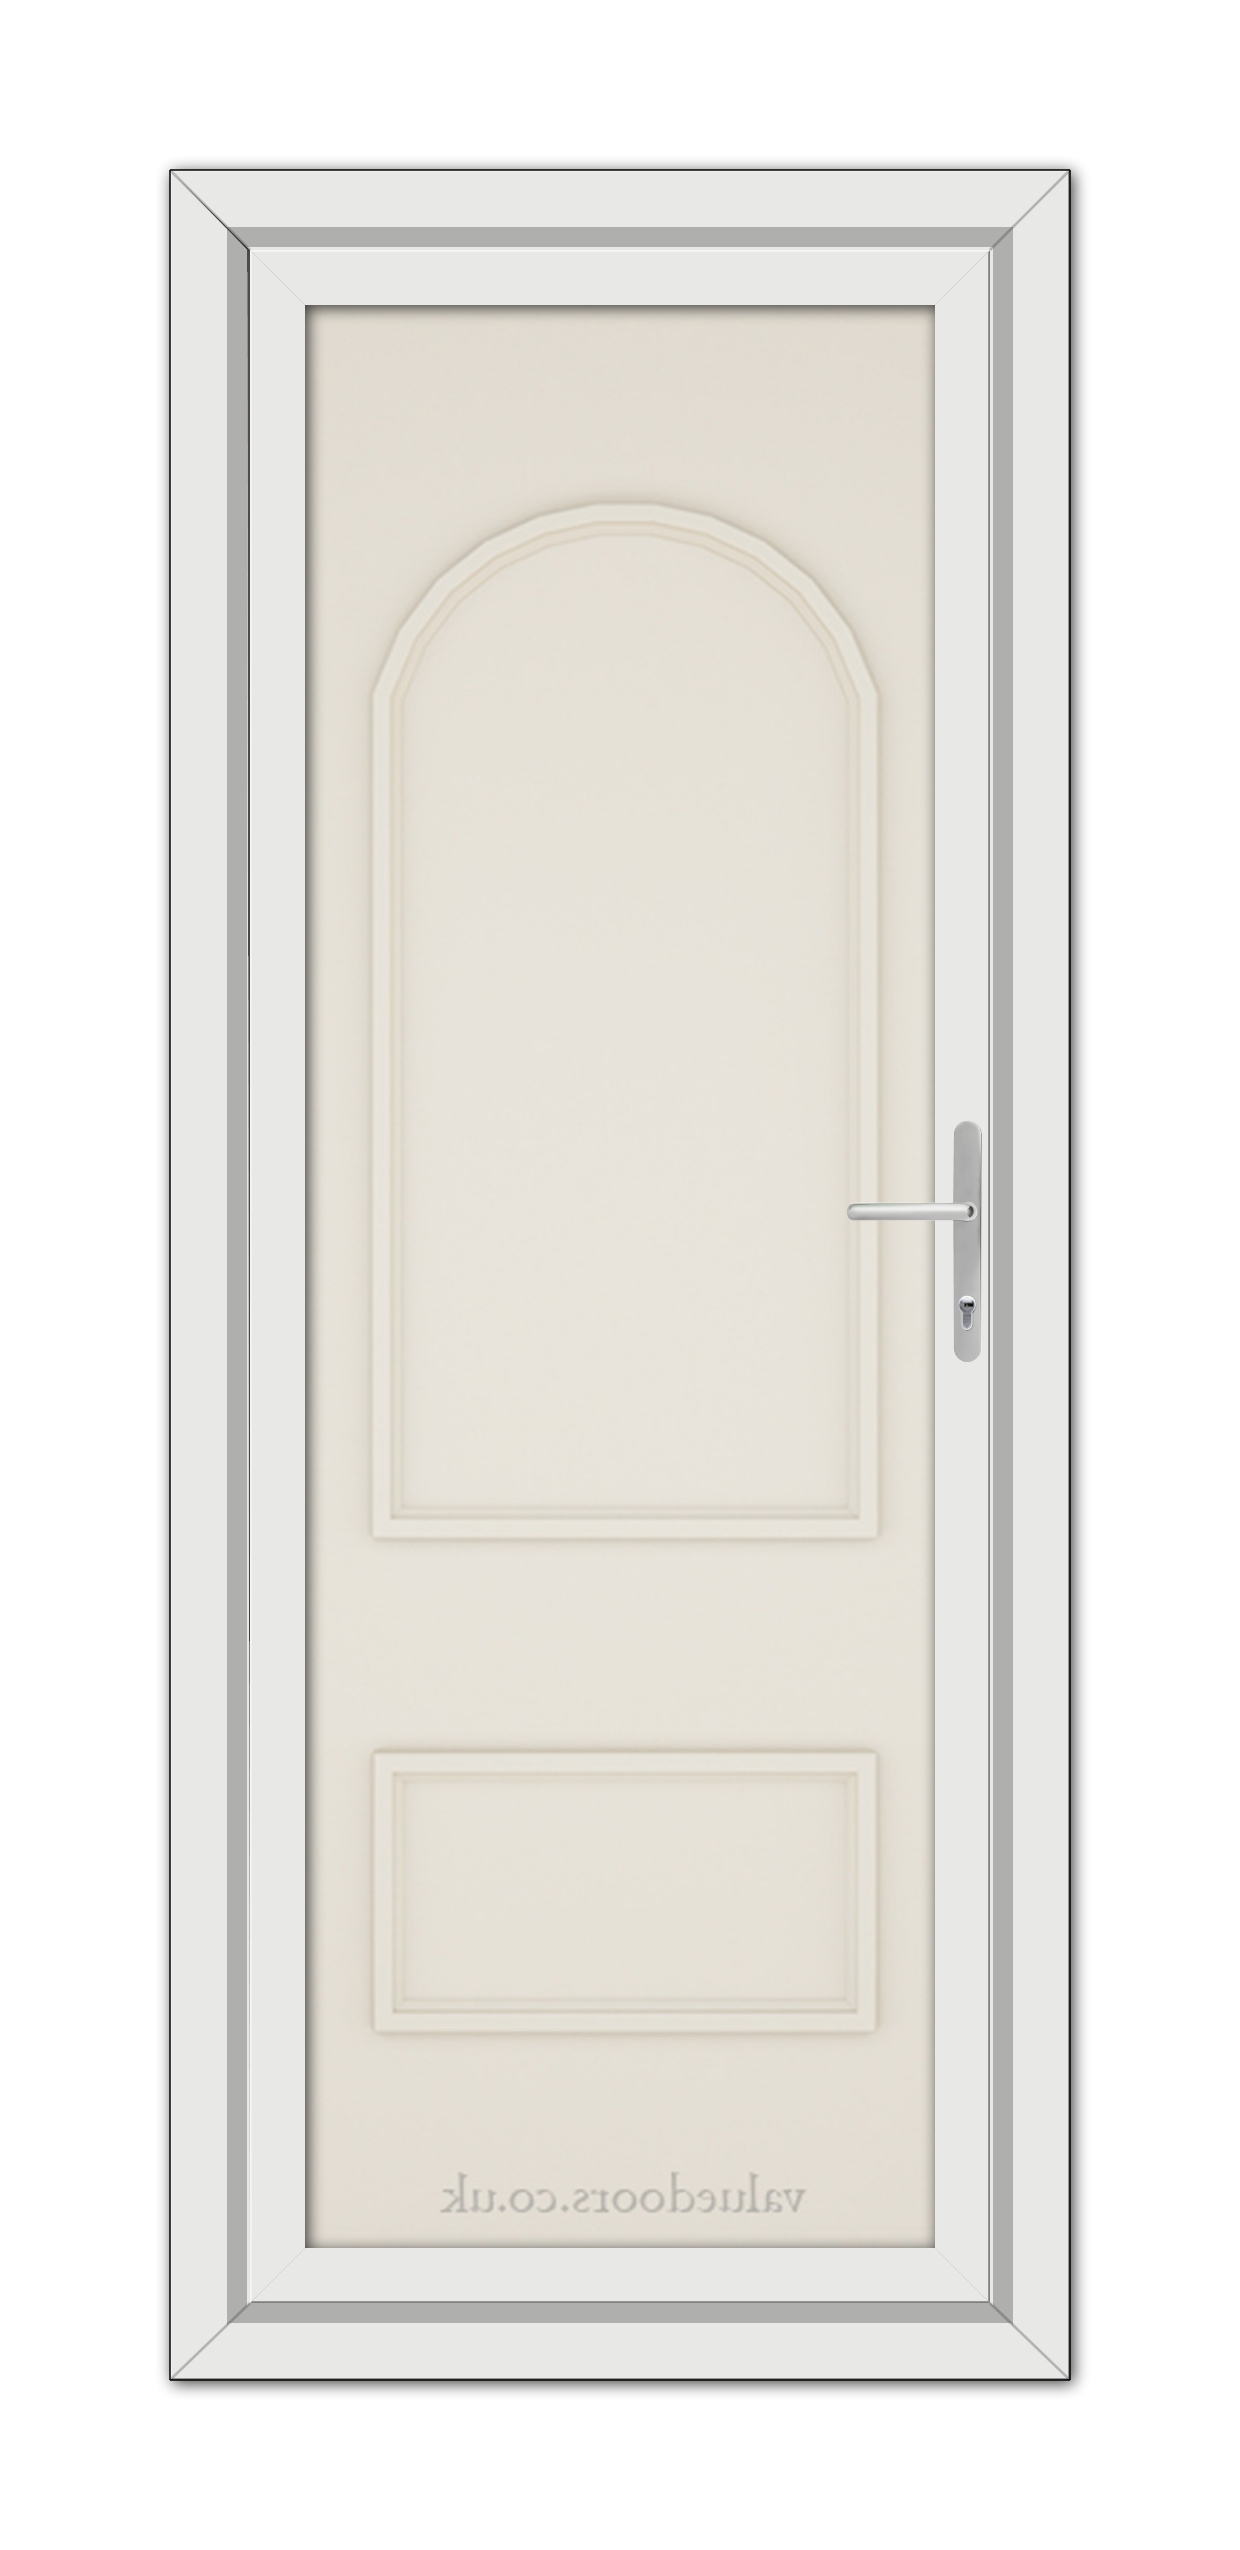 A vertical image of a closed, Cream Rockingham Solid uPVC Door with a silver handle, set within a grey door frame.